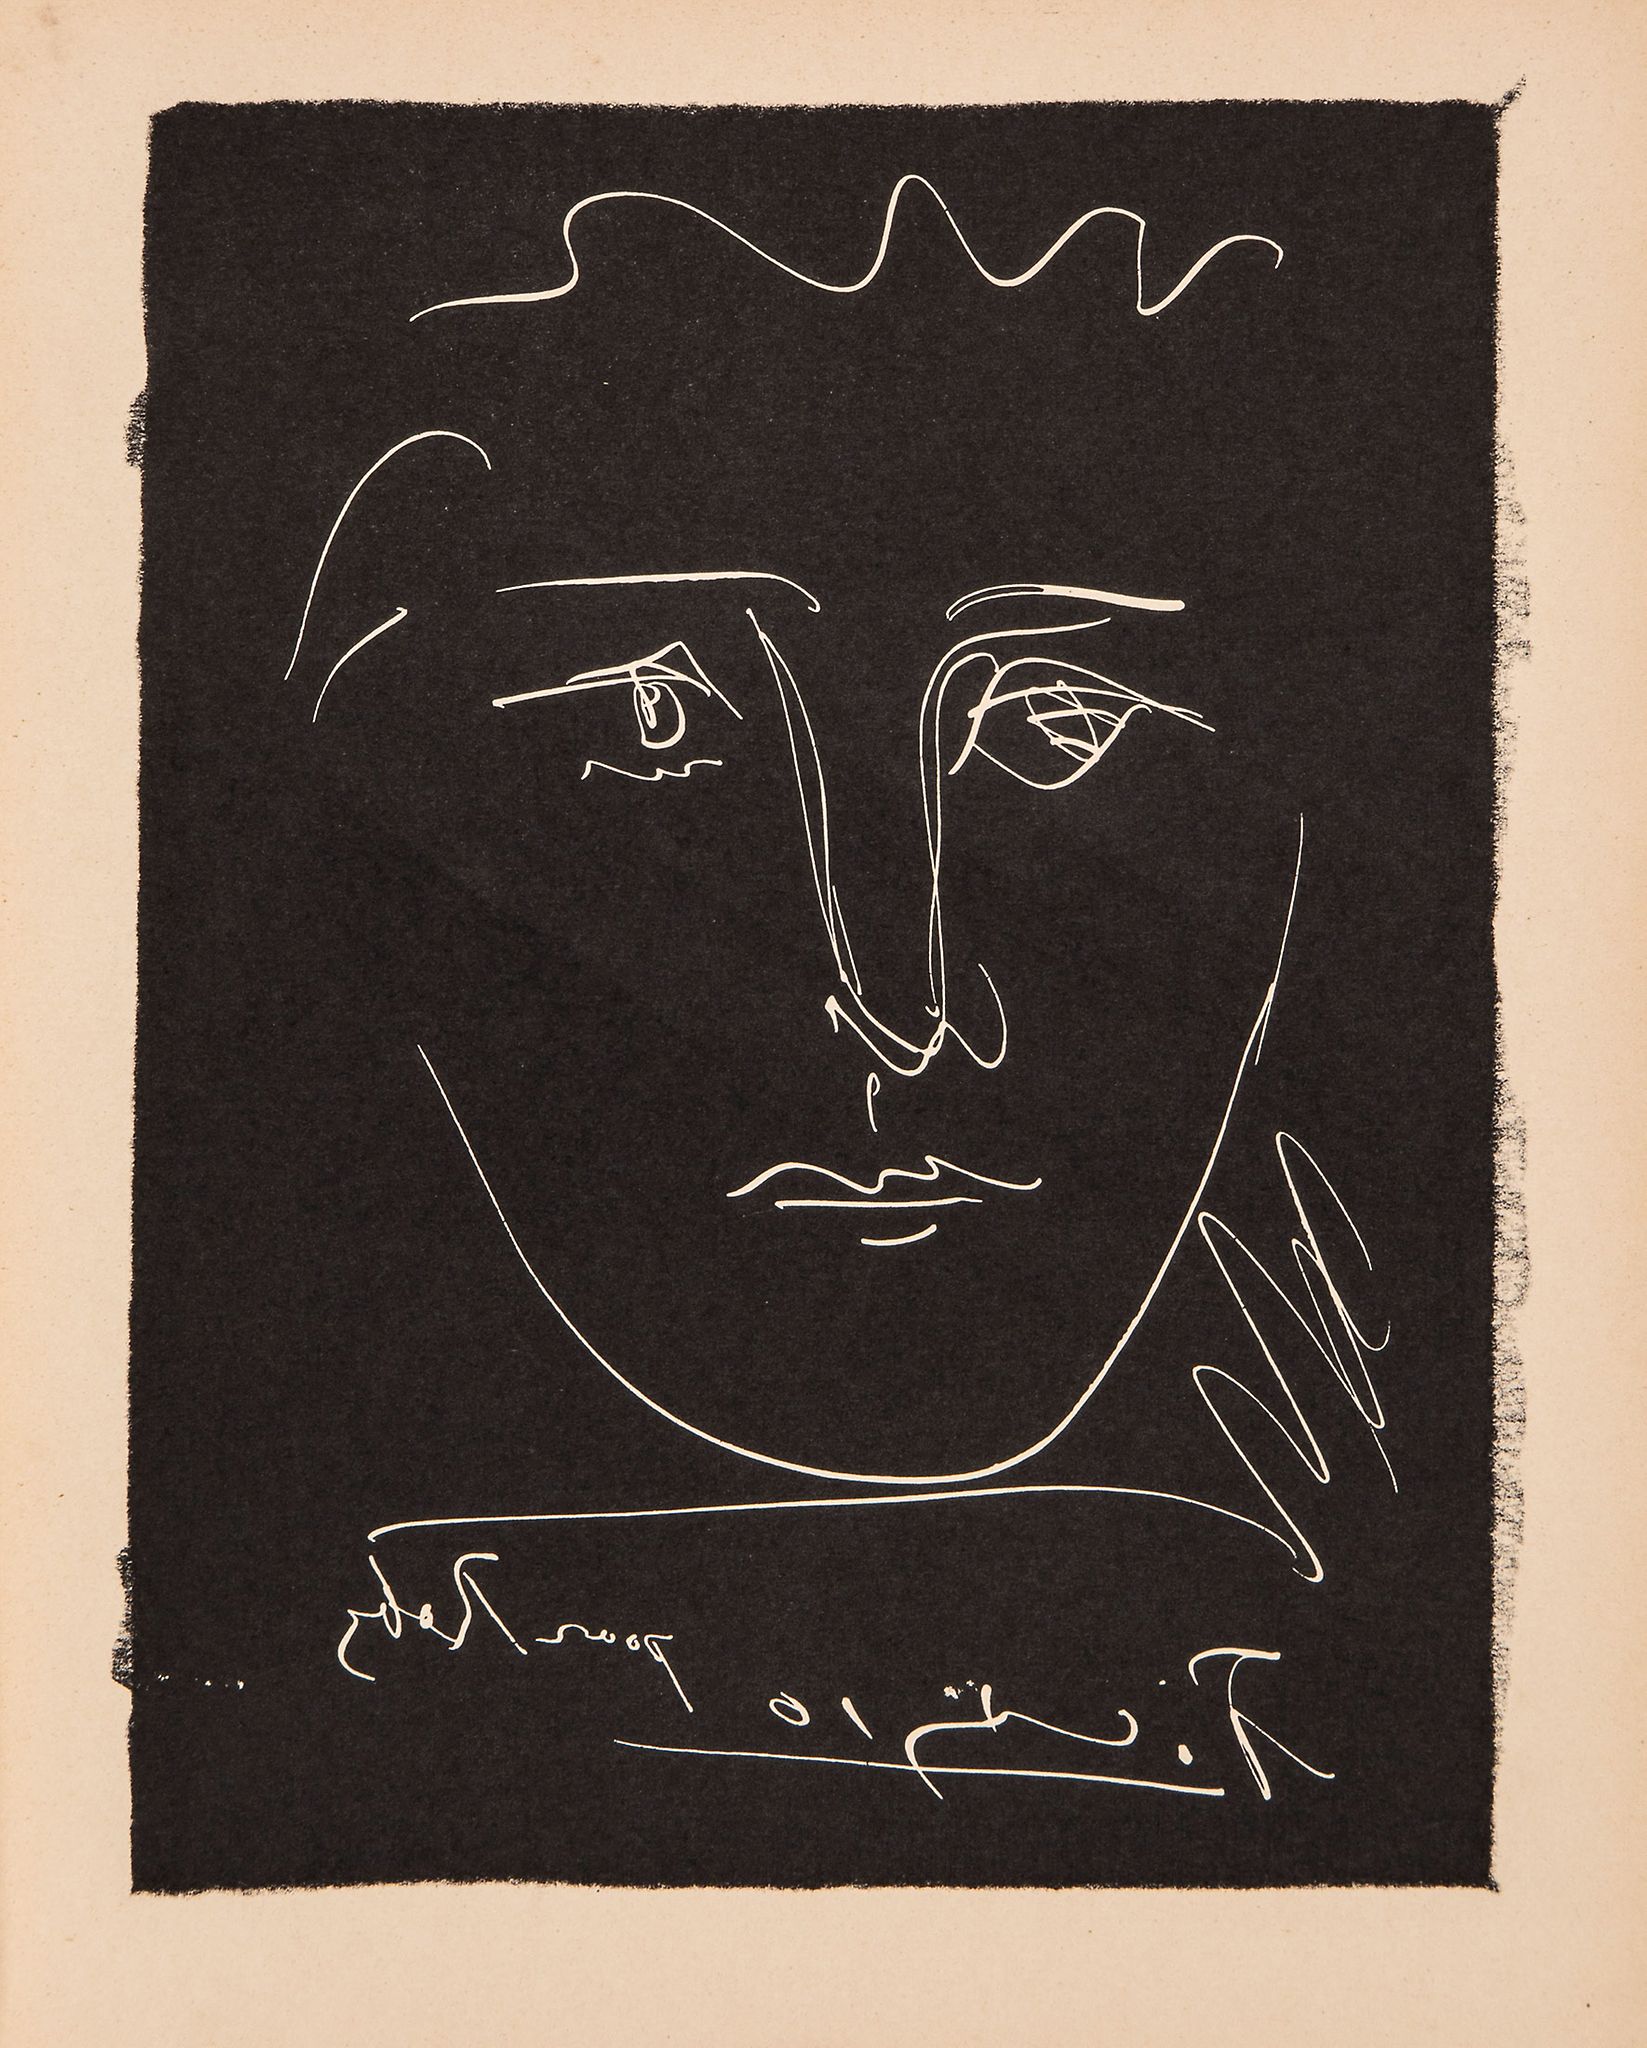 Pablo Picasso (1881-1973) - L'age de Soleil the book, 1950, comprising one heliogravure, with